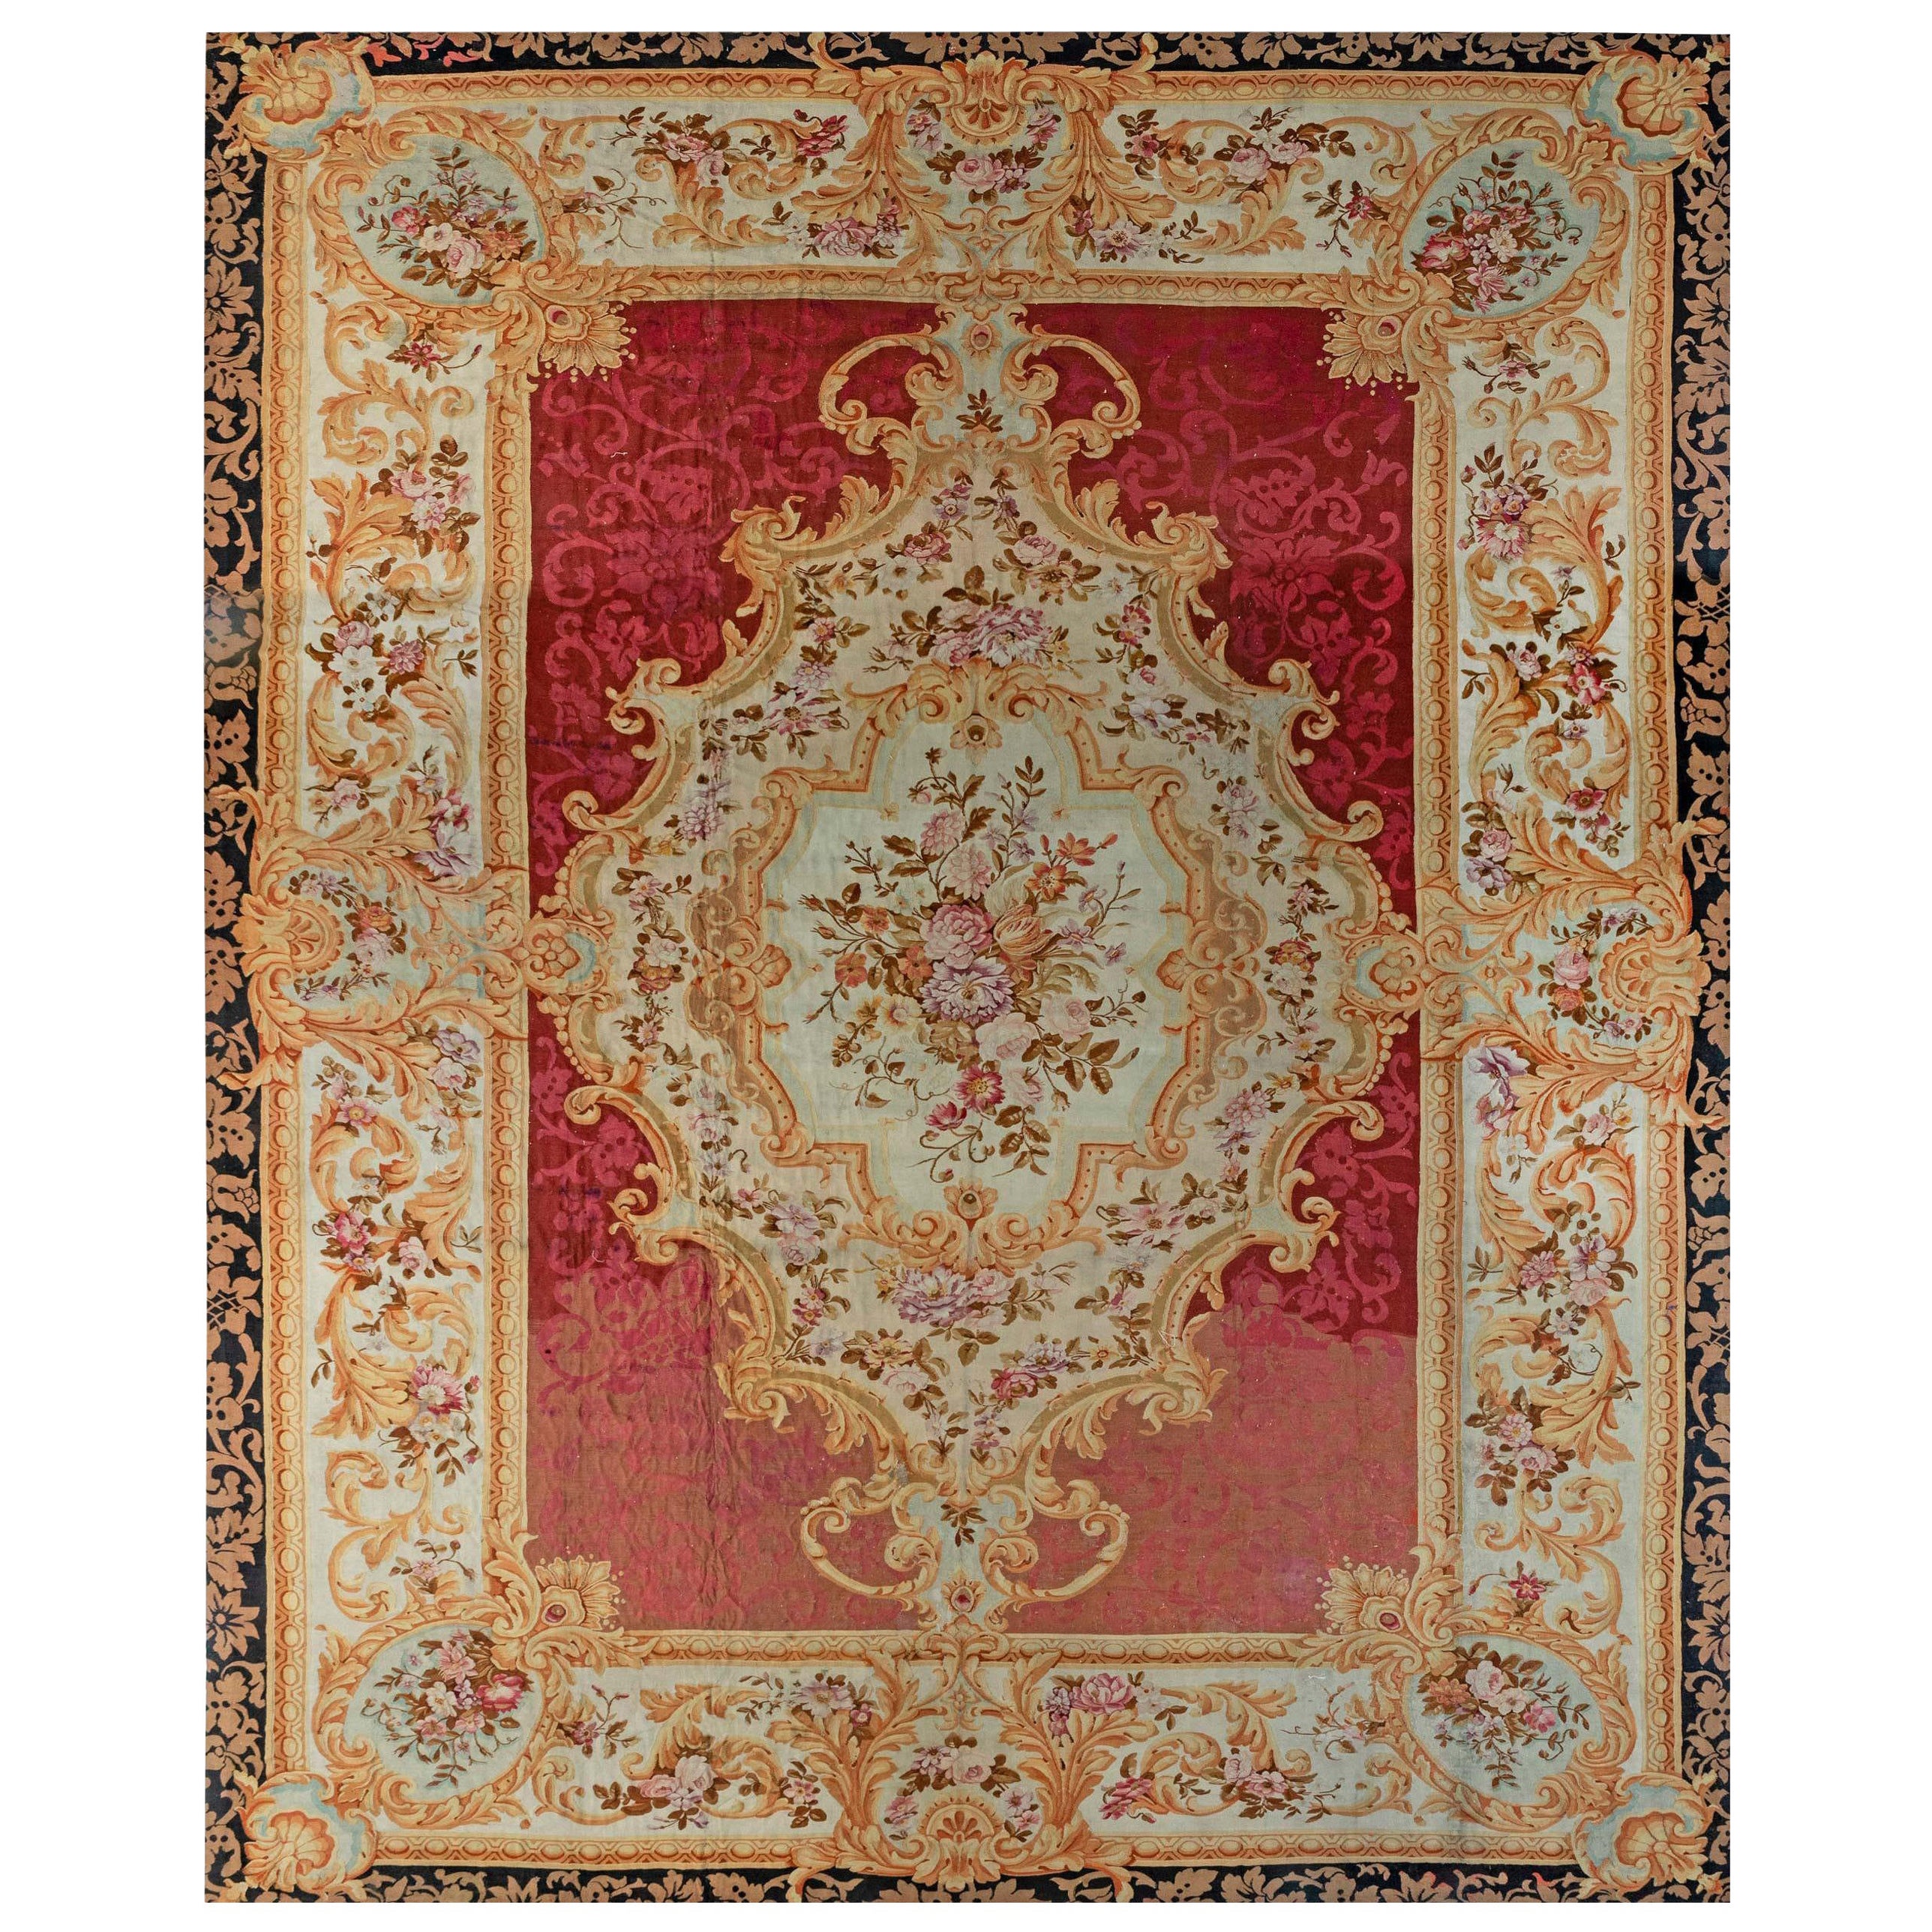 Authentic 19th Century Floral French Aubusson Rug